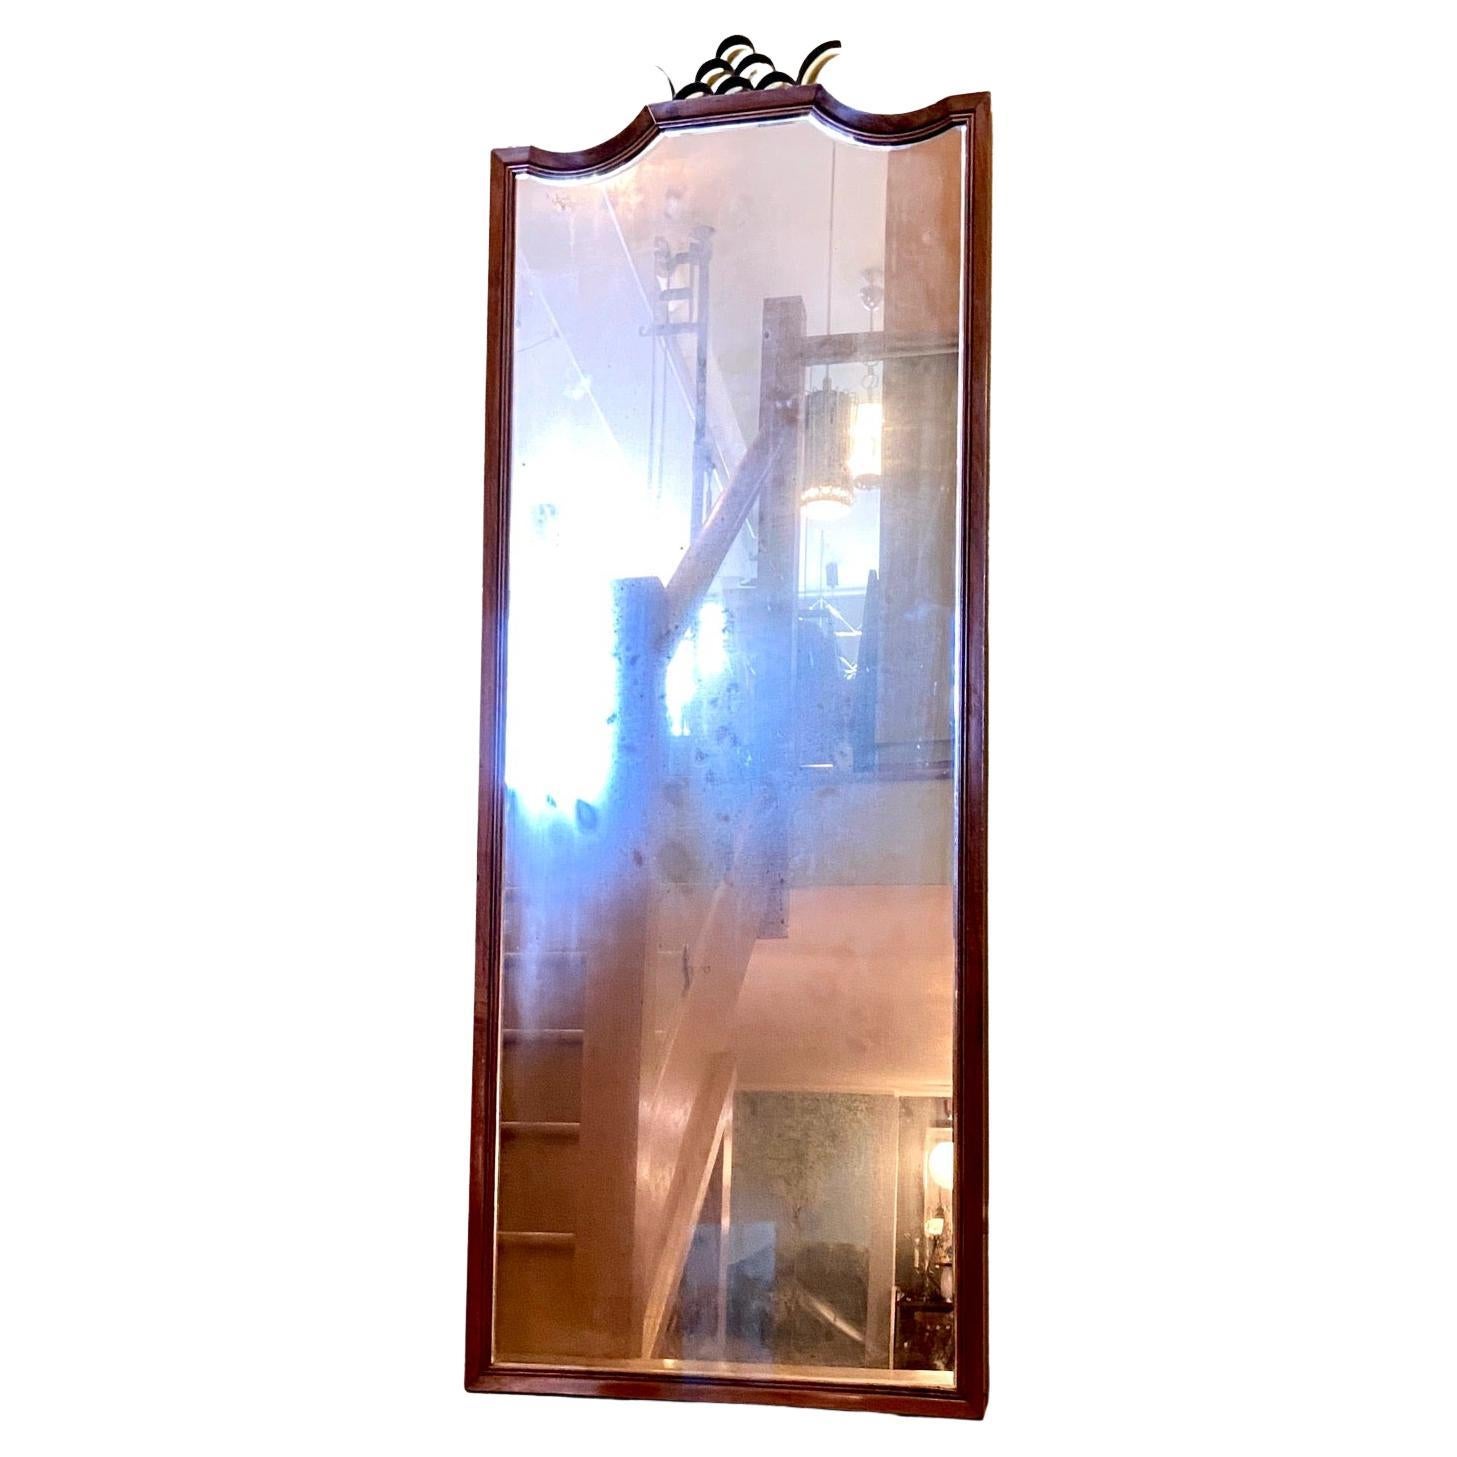 A Paolo Buffa good quality, heavy 1940s Art Deco Figured Walnut full length wall mirror with a thick black metal Crown decoration (possibly bronze). The mirrored surface is original from the 1940s and is faded and distressed. (see photos). The frame